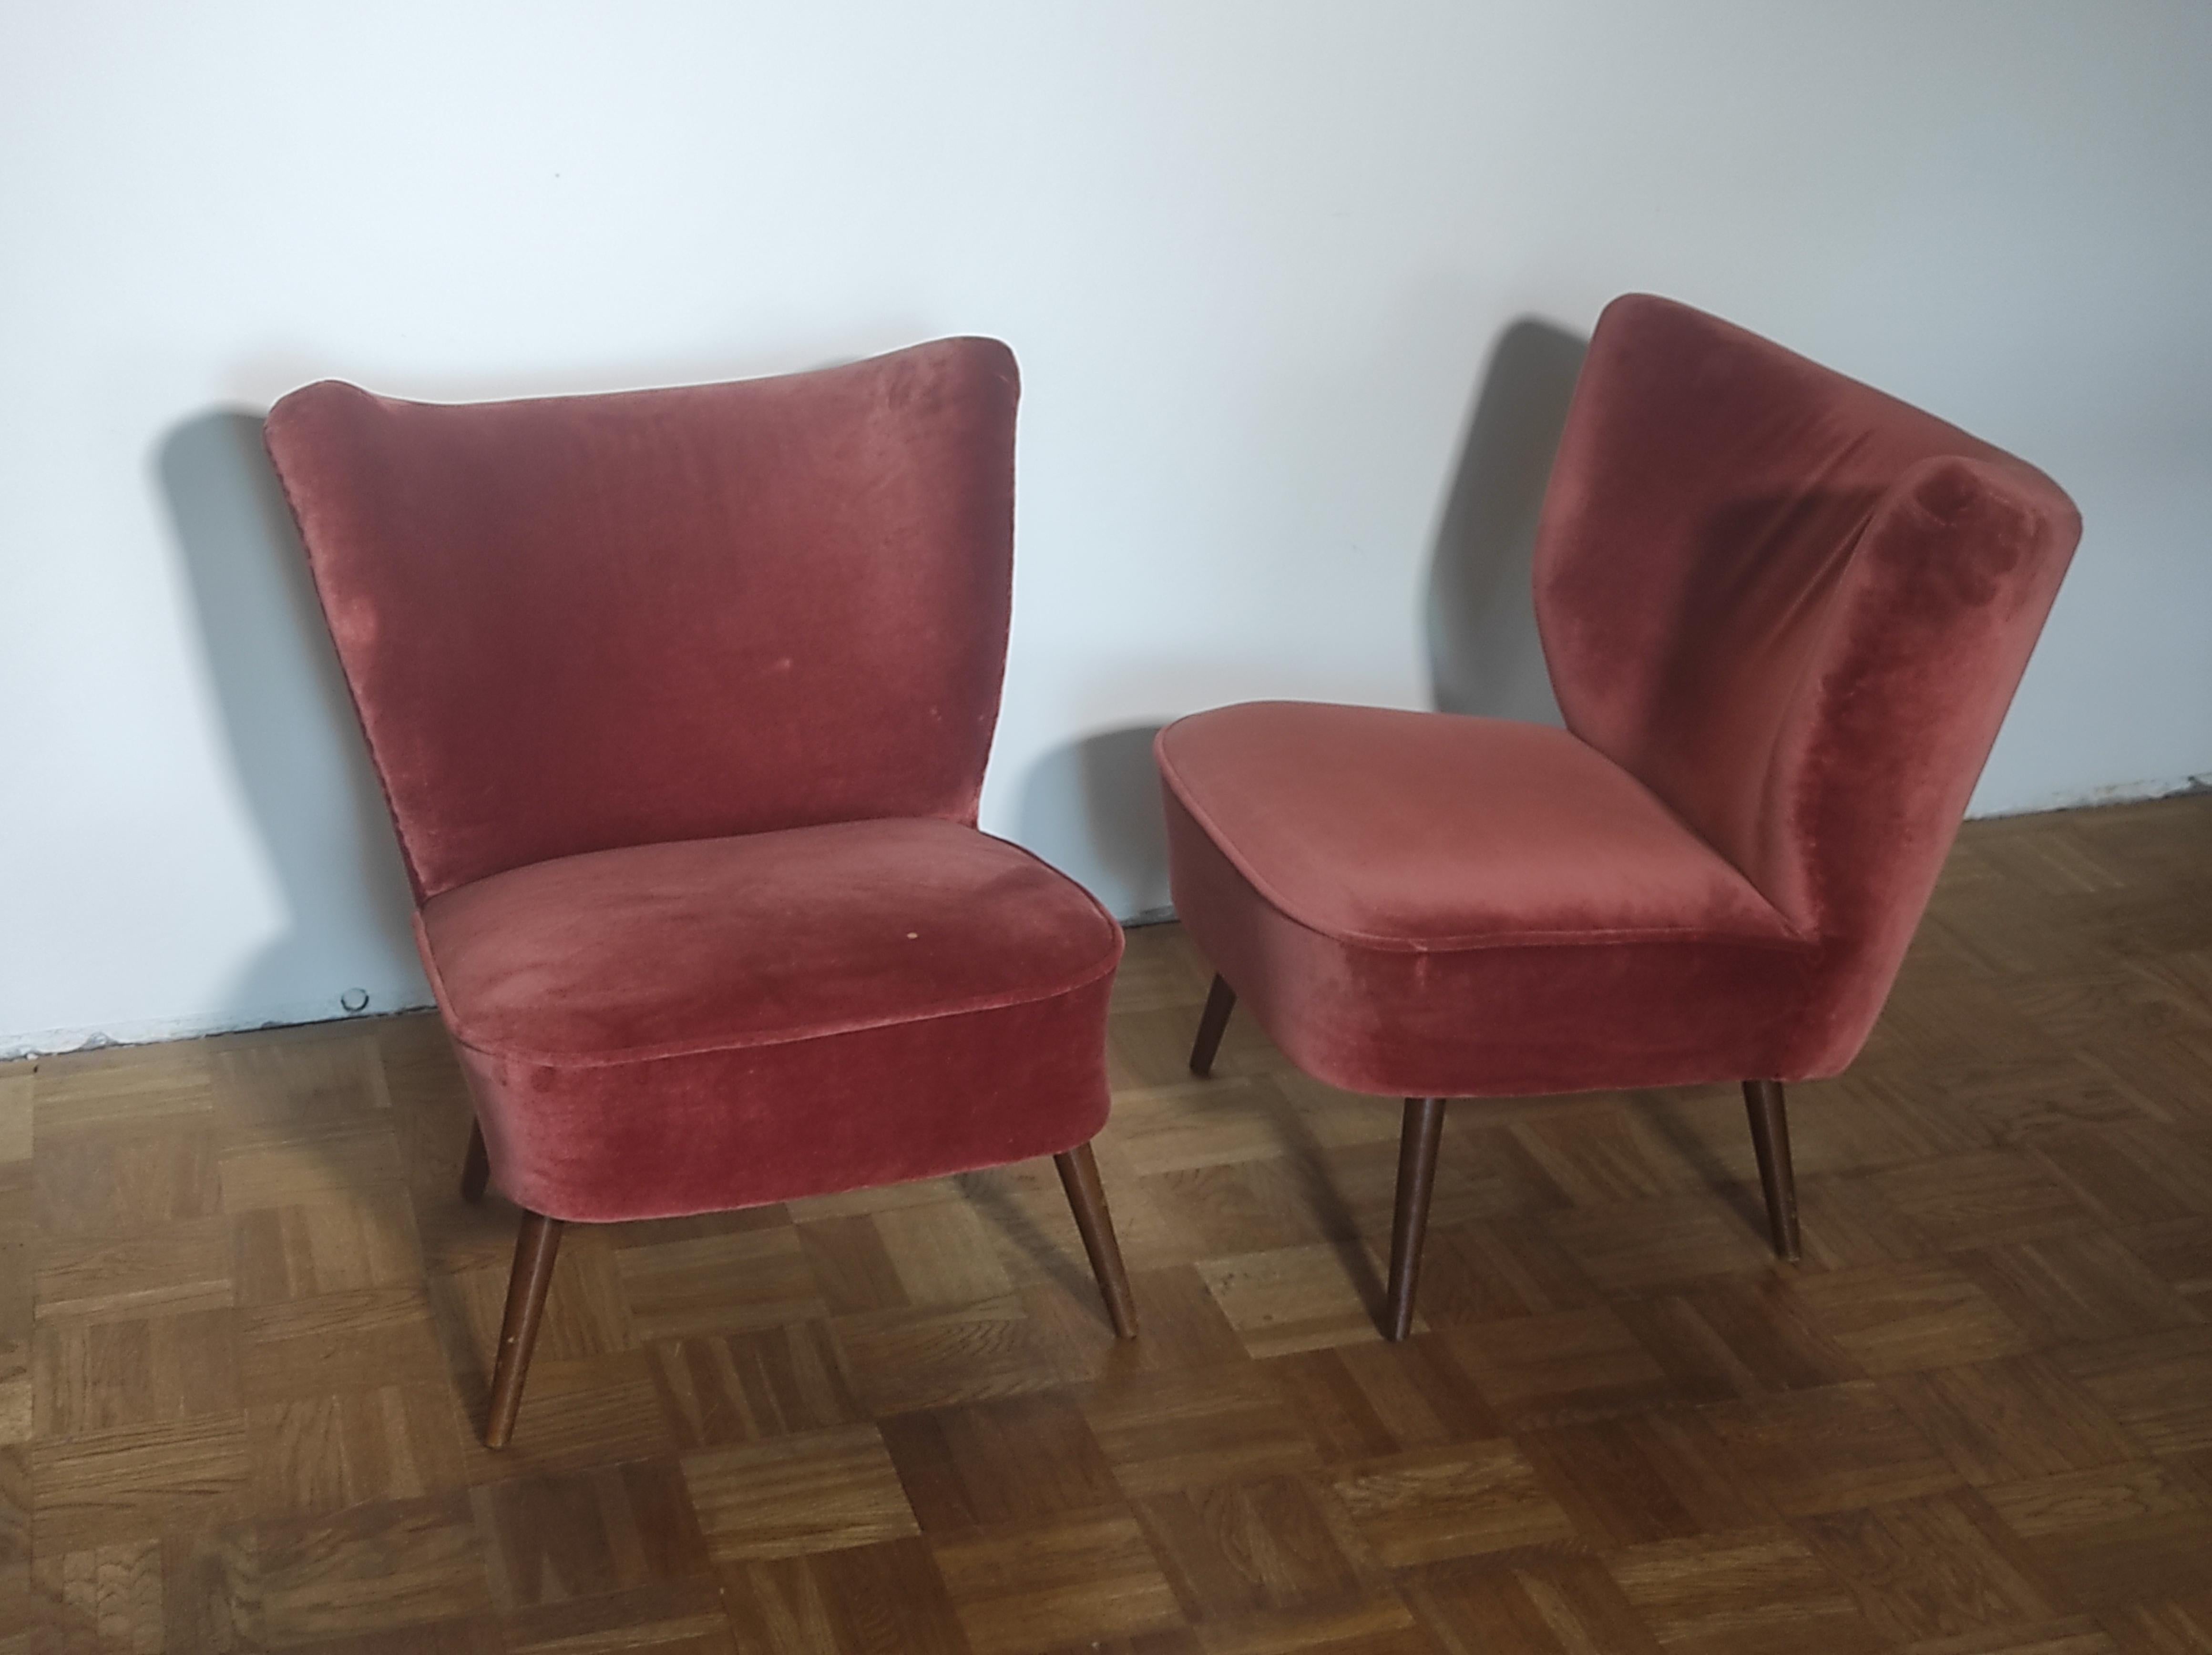  Danish Cocktail Chair 1960s In Good Condition For Sale In Čelinac, BA